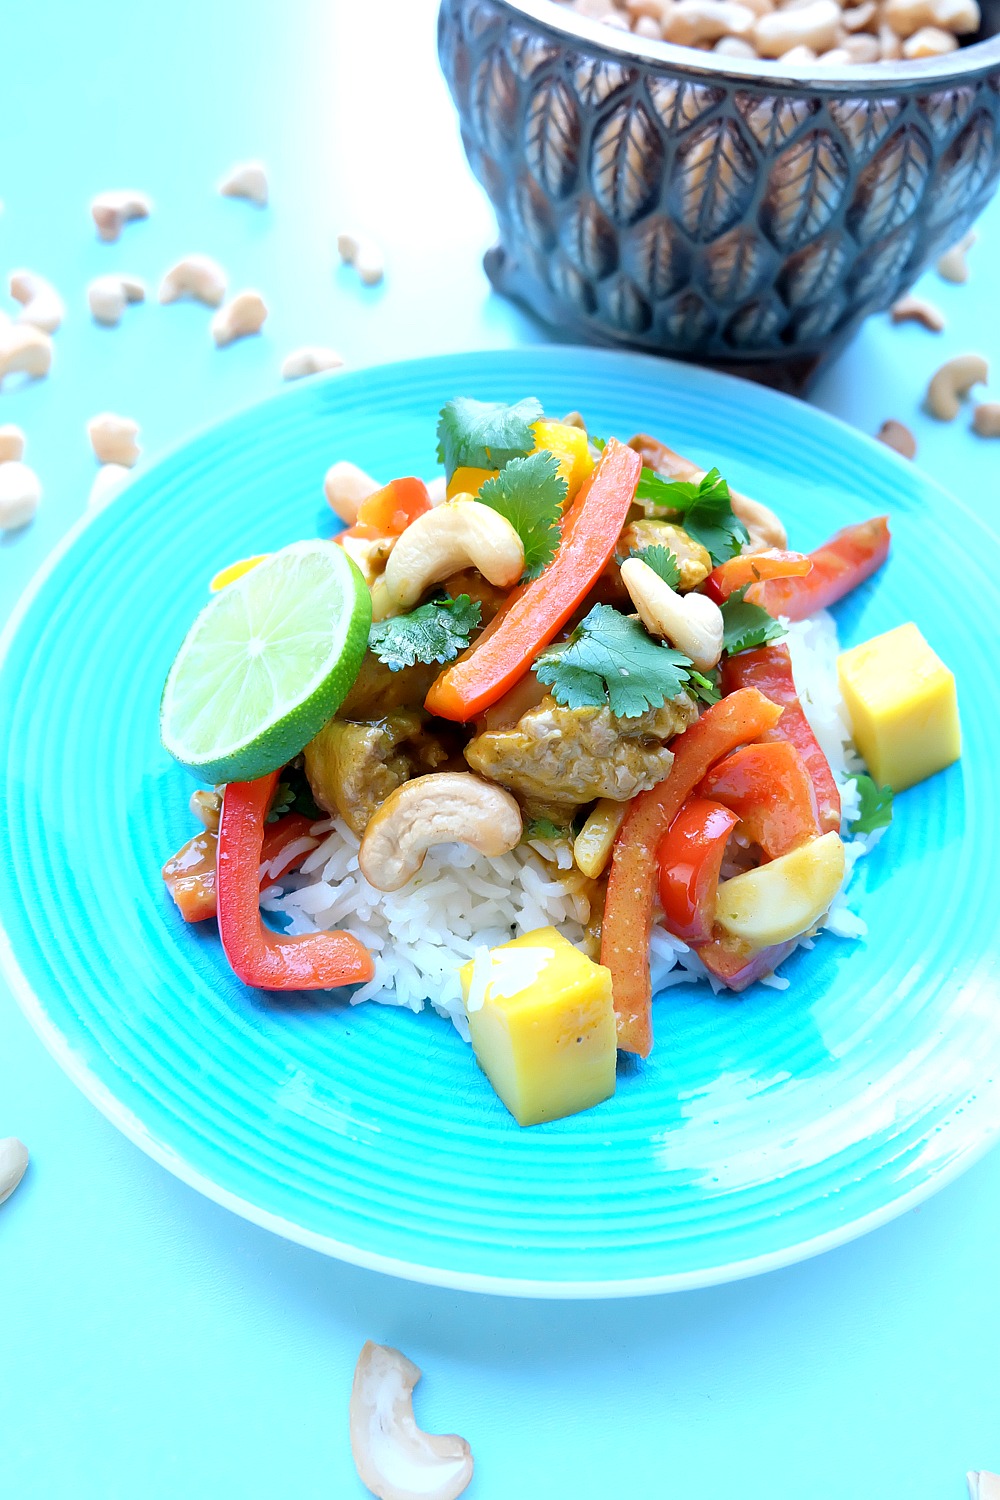 Feed your family a delicious, fresh meal packed with protein that will be on the table in 30 minutes or less! This healthy Mango Cashew Turkey Curry Recipe is sure to become a favorite! Make in a cast iron skillet or your favorite frying pan! Bonus- It's a one pot meal! #TryTurkey